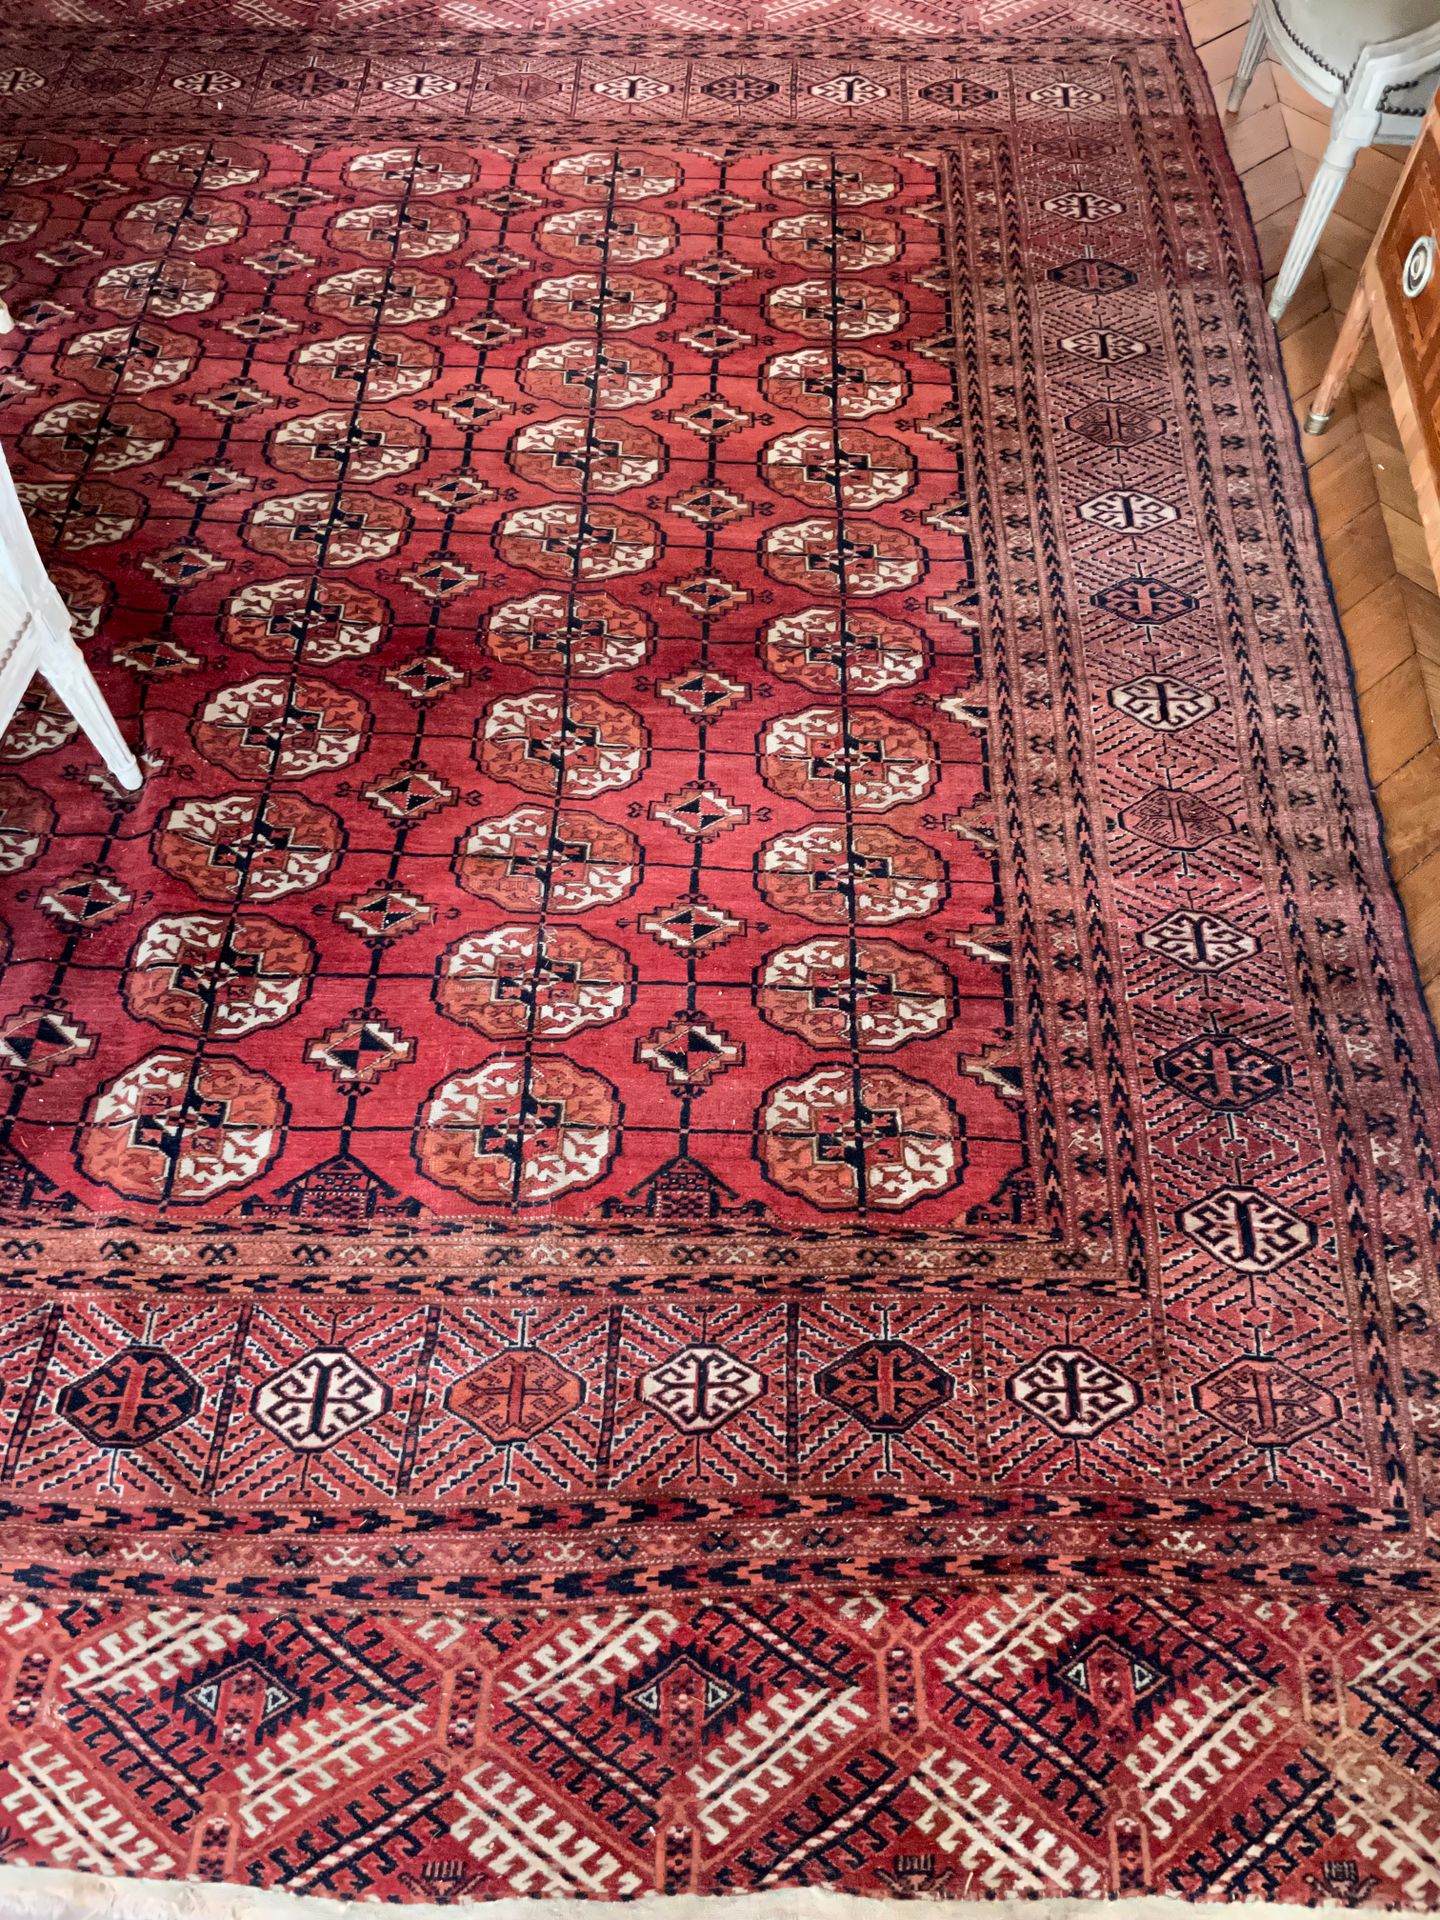 Null 
Bukhara carpet



In wool with knotted points, on a red background



With&hellip;